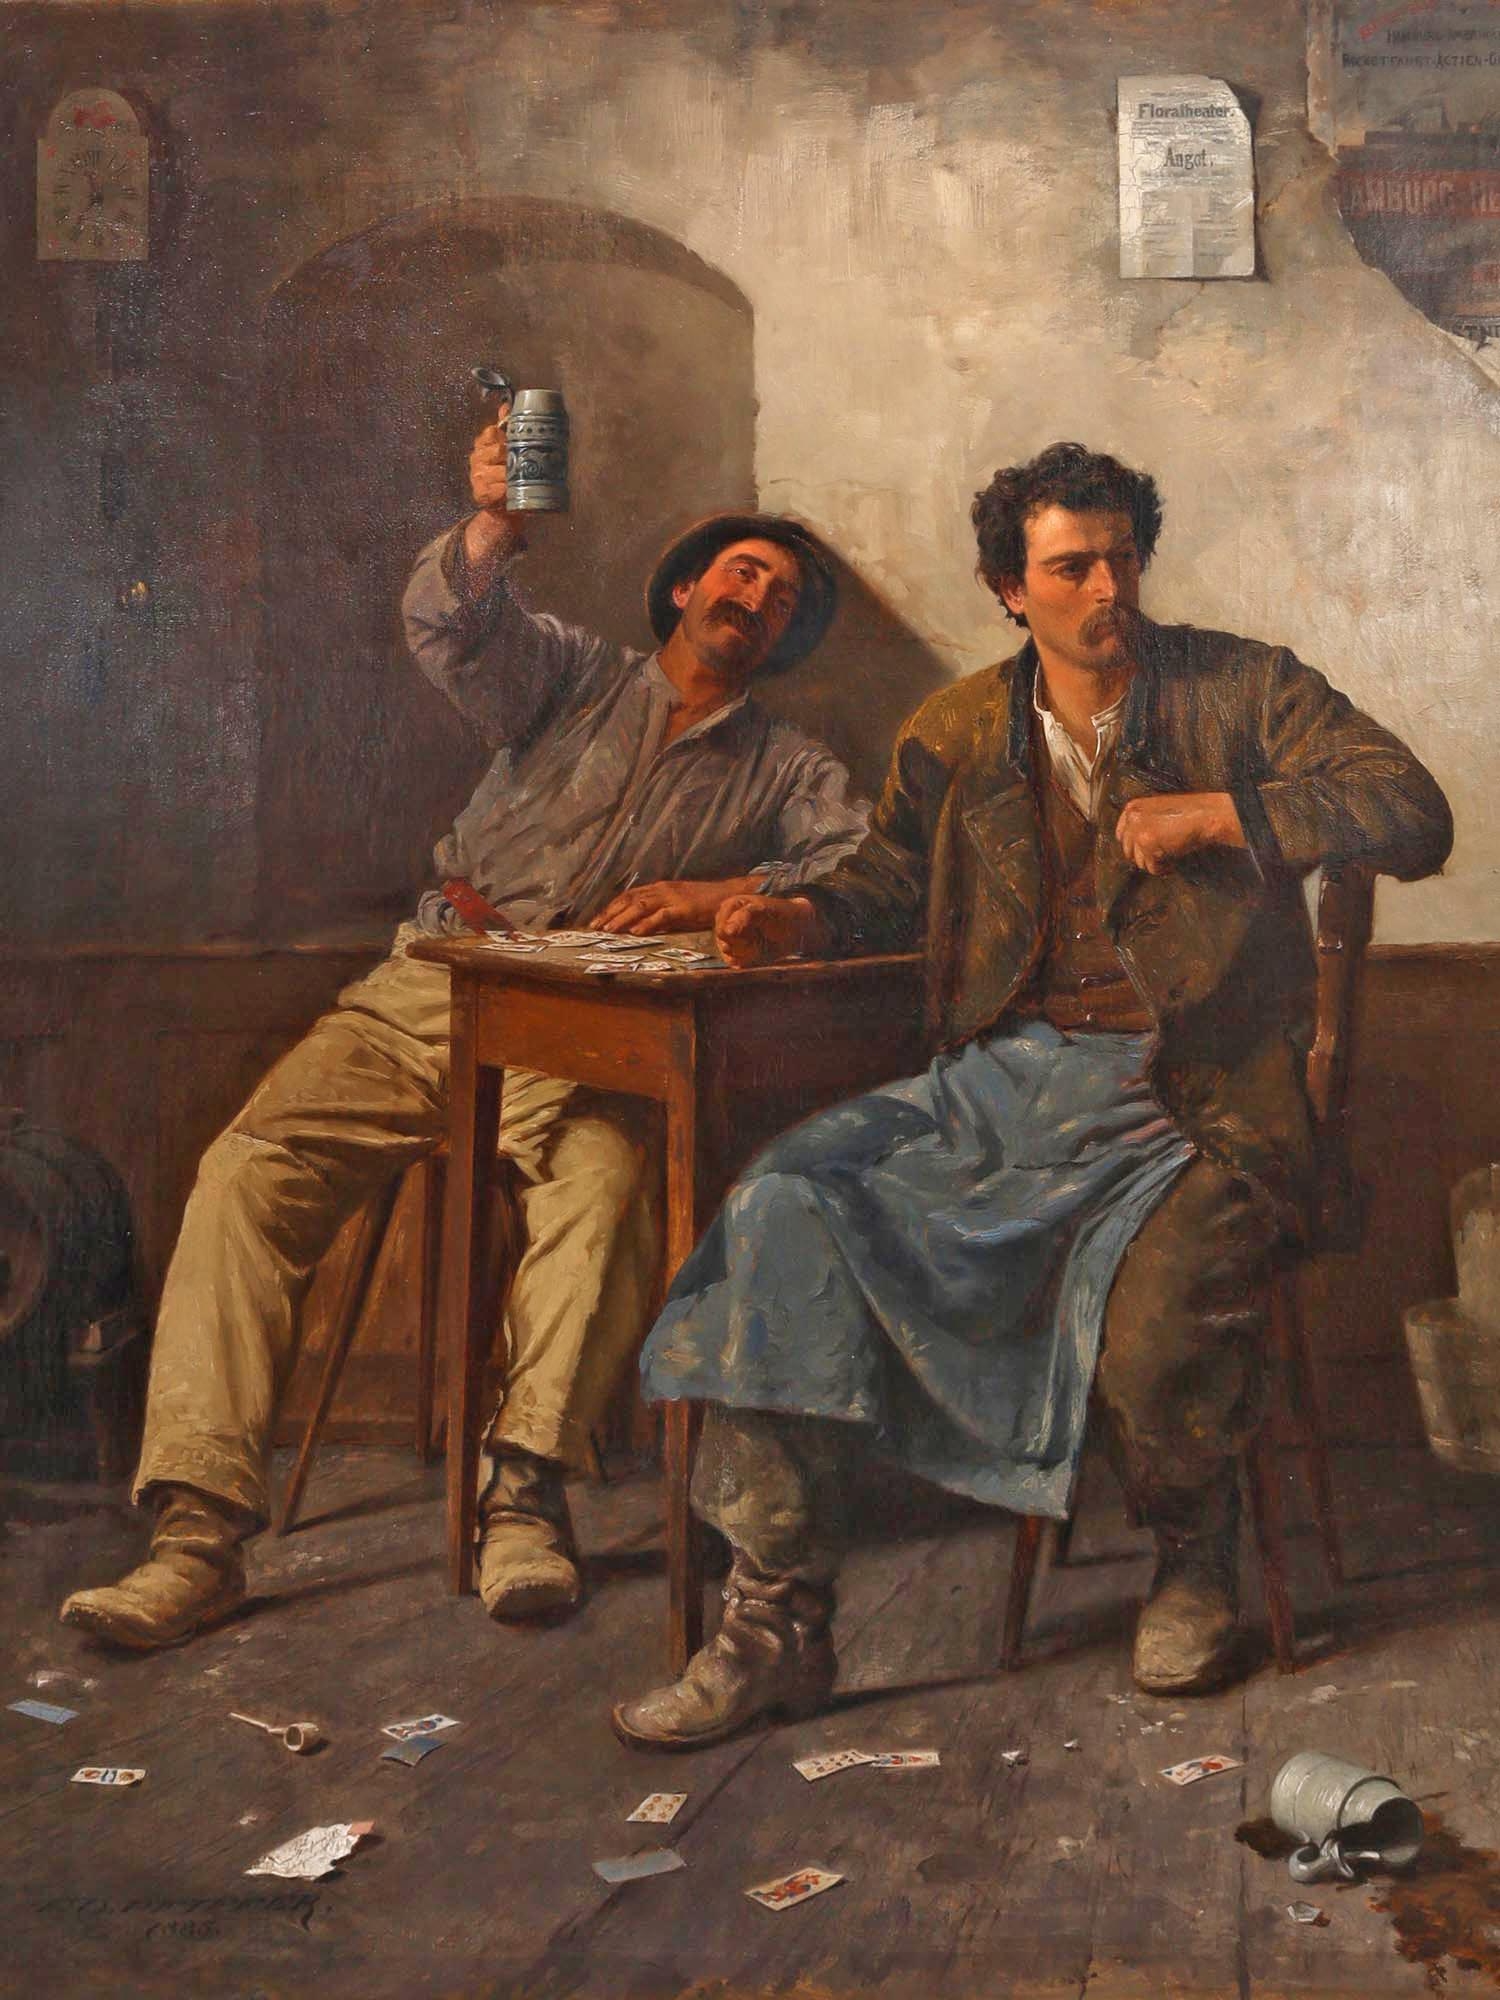 Two workers playing cards by Eduard Pfyffer, 1885